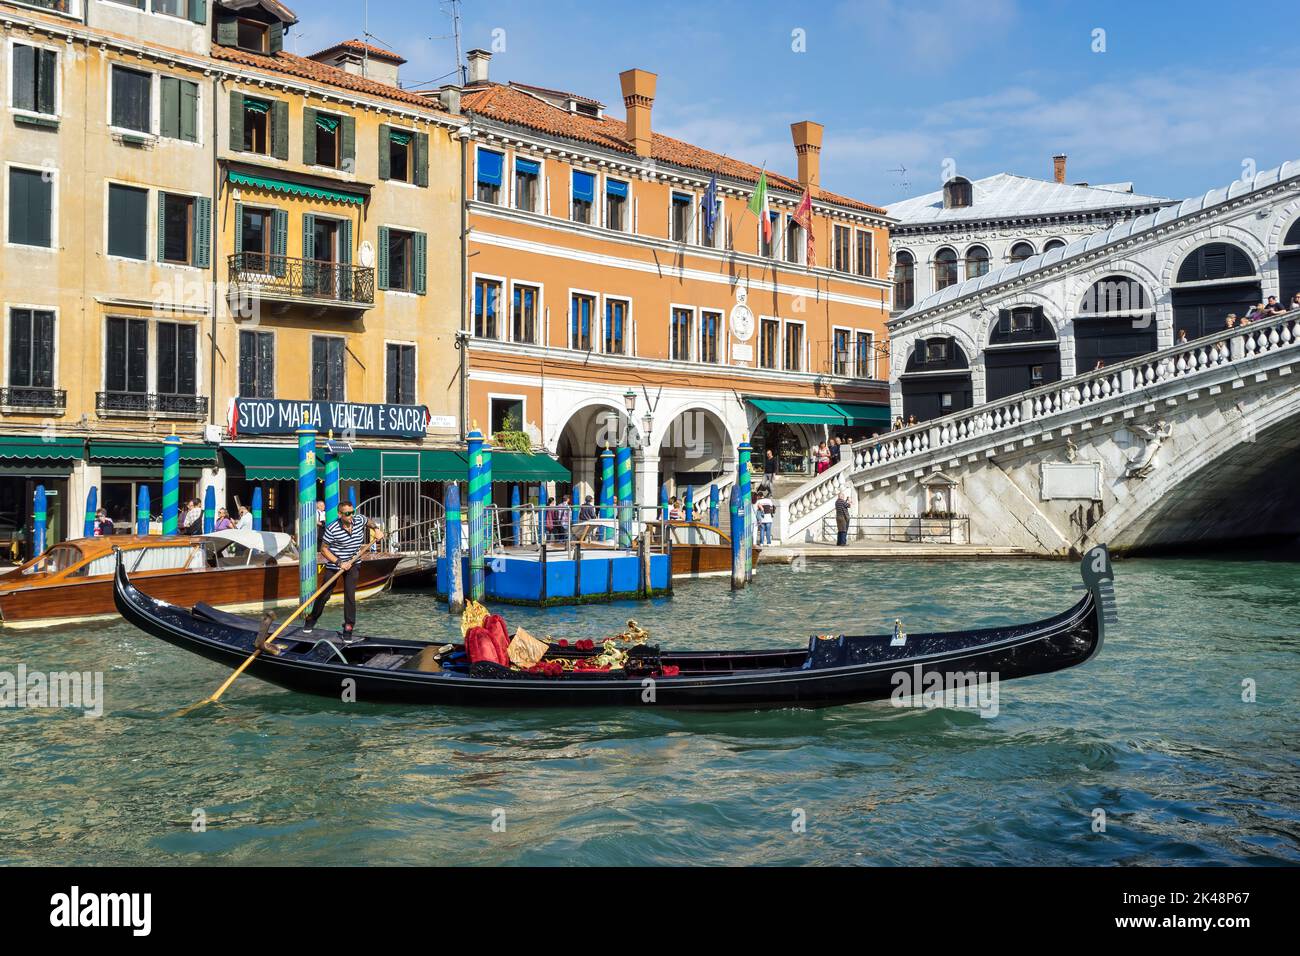 VENICE, ITALY - OCTOBER 12 : Gondolier in action in Venice on October 12, 2014. Unidentified people. Stock Photo